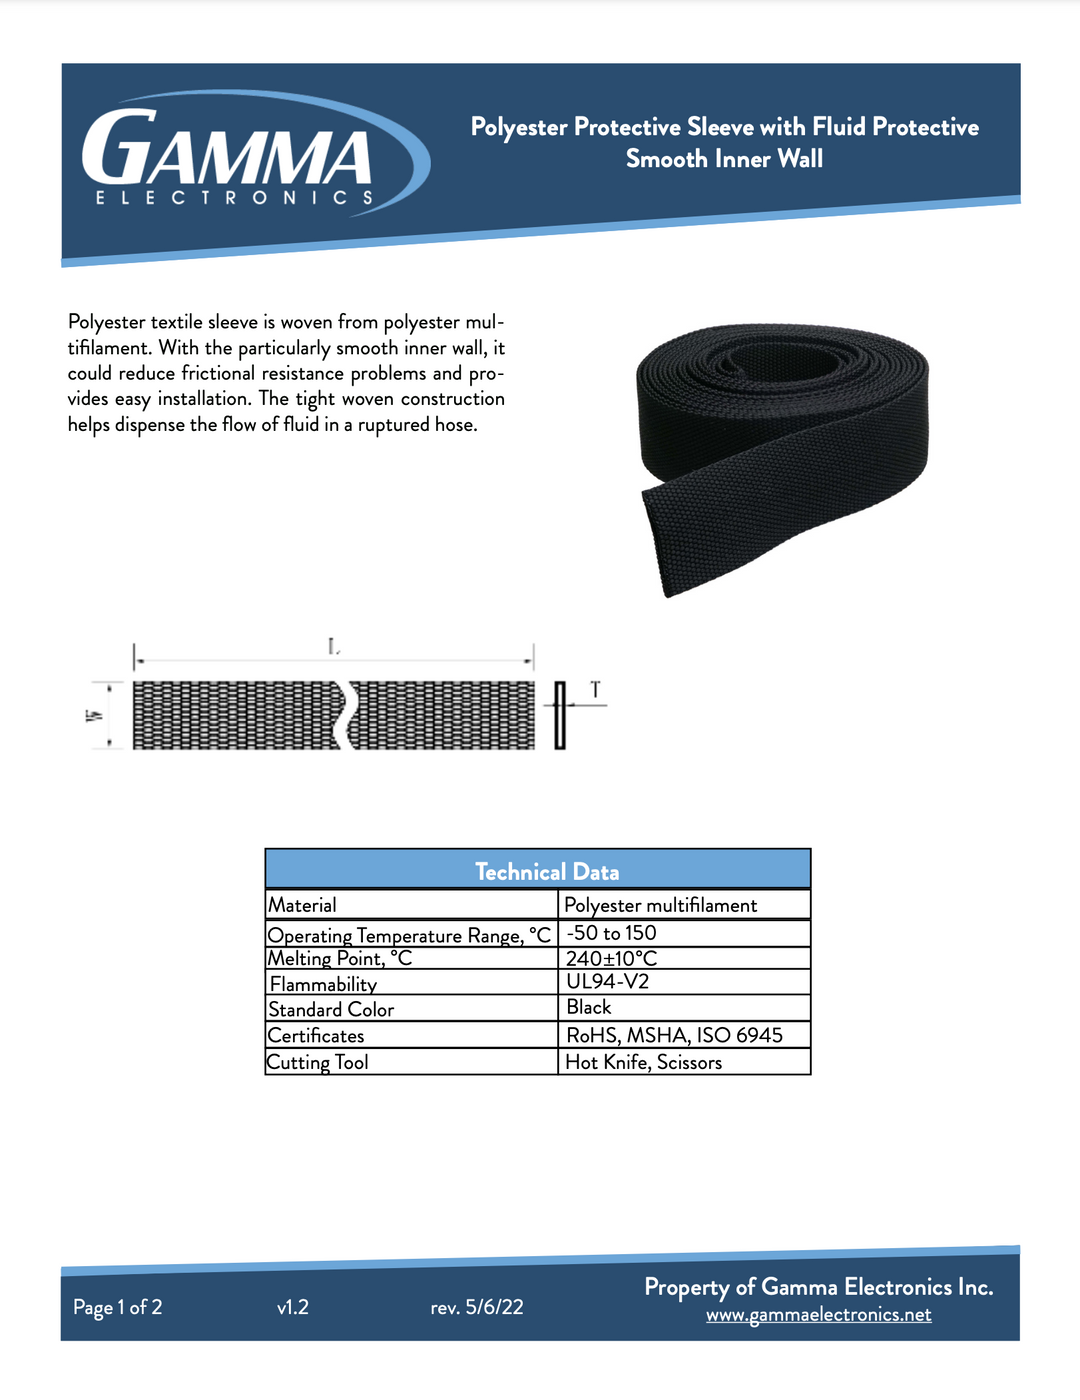 Gamma Polyester Protective Sleeve with Fluid Protective Smooth Inner Wall Braided Sleeving - Gamma Electronics